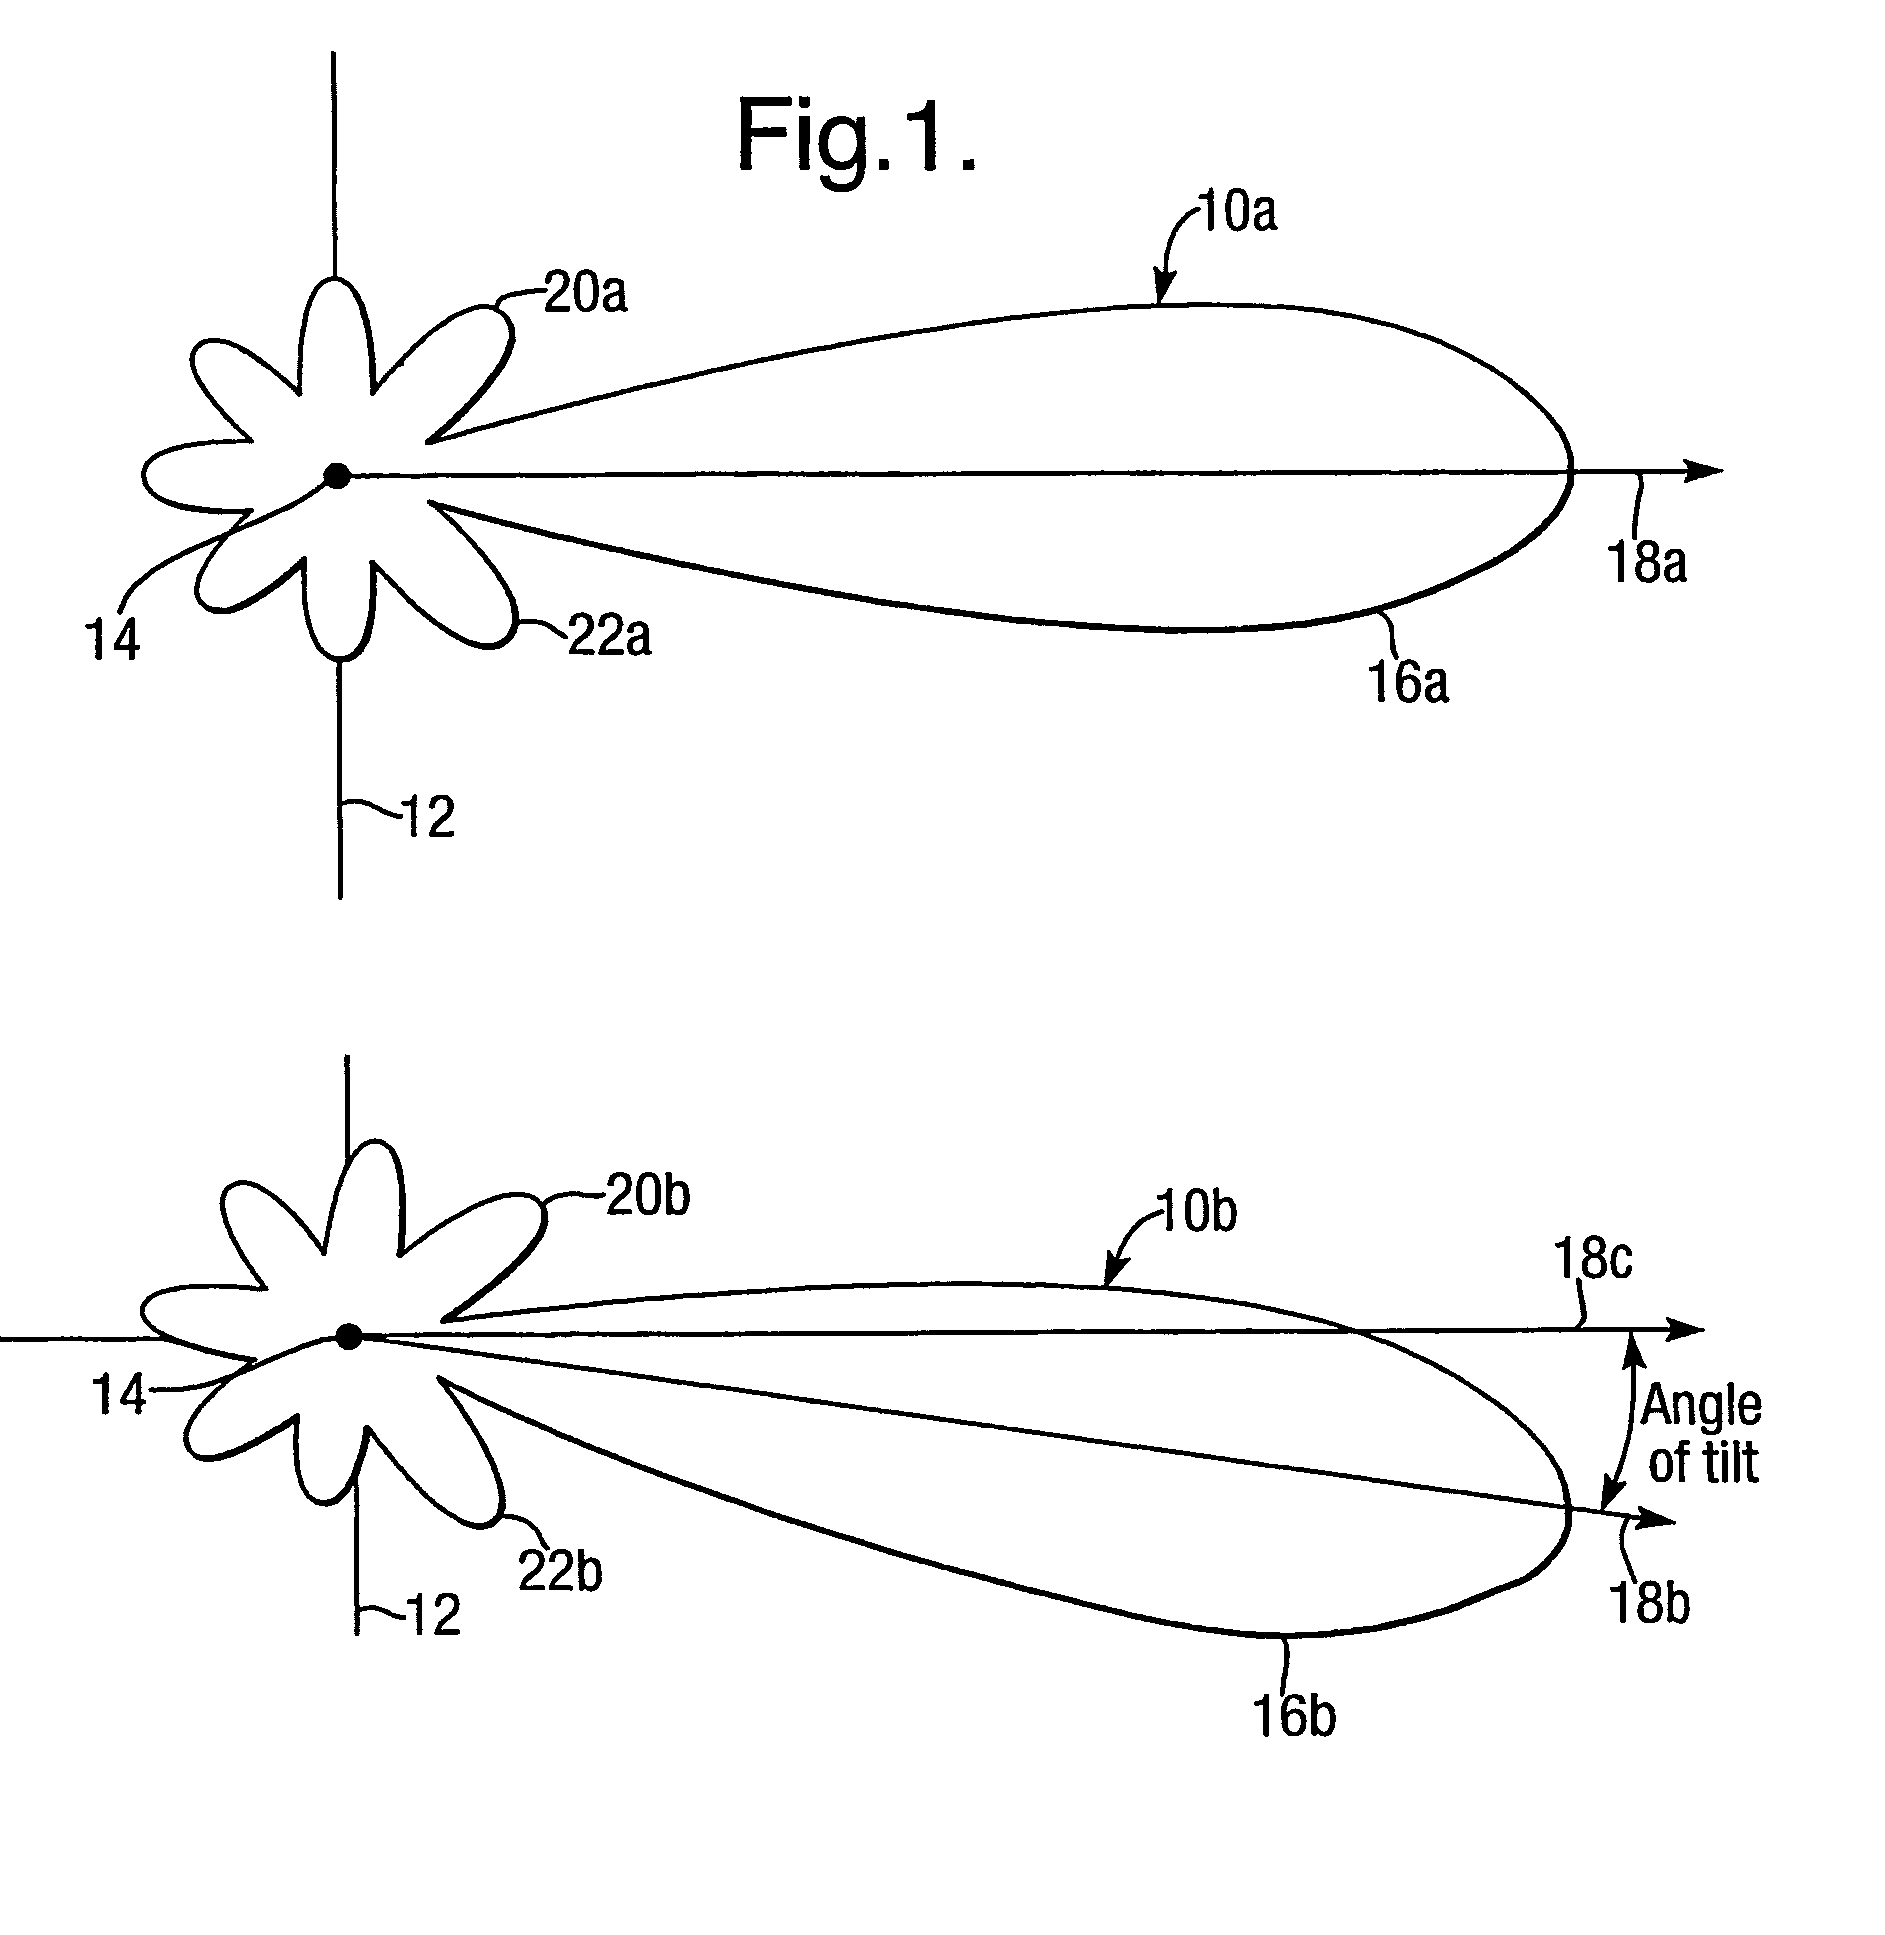 Phased array antenna systems with controllable electrical tilt